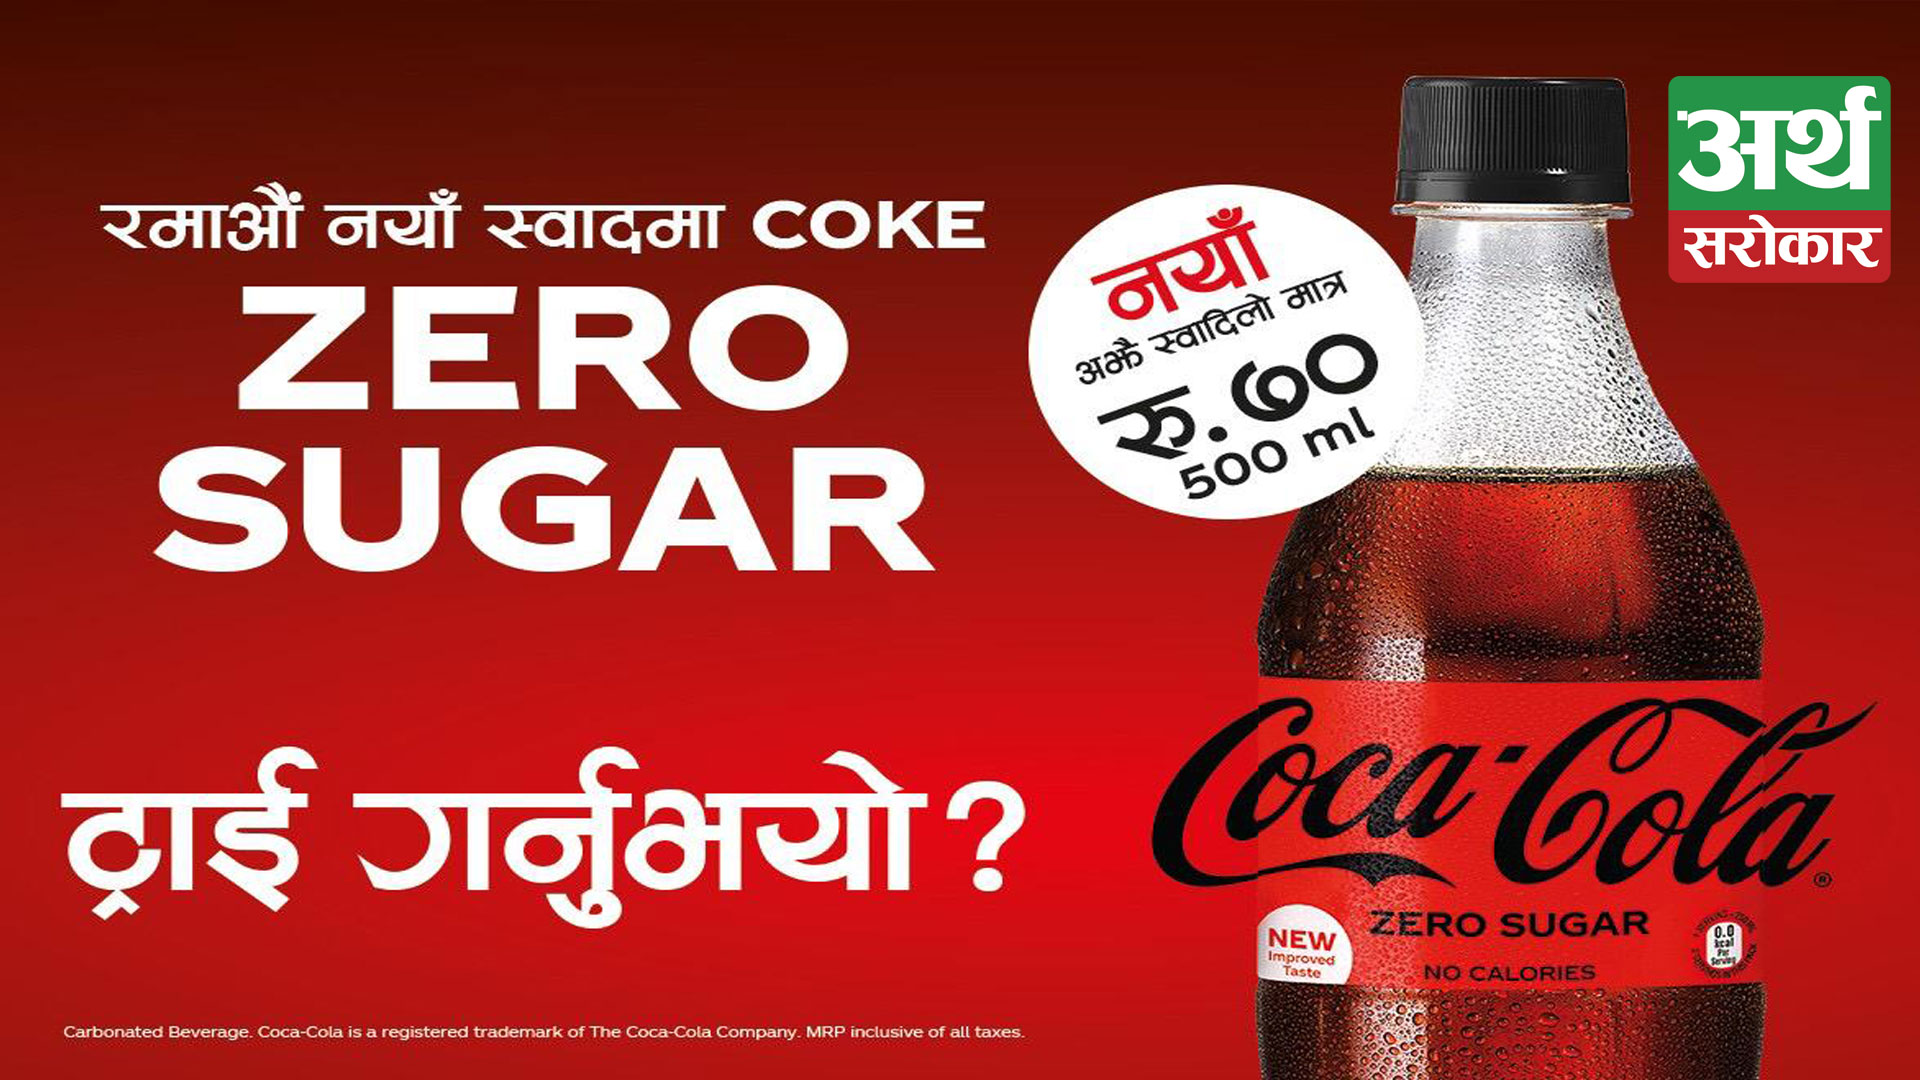 Nepal can now enjoy and share the taste of the new Coca-Cola Zero Sugar